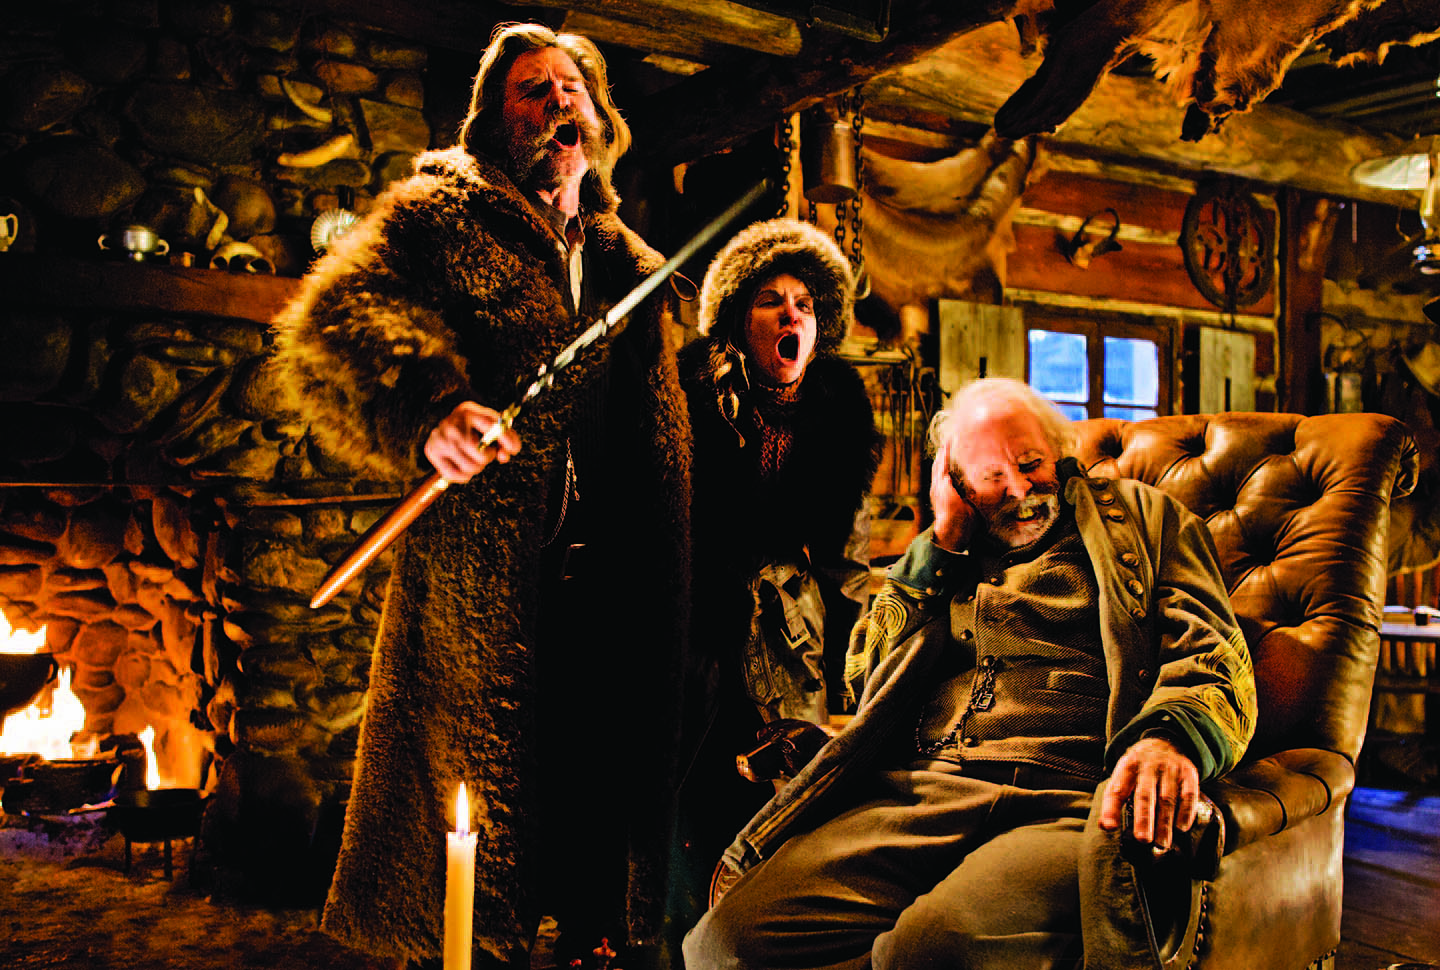 In The Hateful Eight, Bruce Dern stars as Confederate Gen. Sanford Smithers — a role written especially for him by director Quentin Tarantino. Photography: Andrew Cooper, SMPSP © 2015 The Weinstein Company. All Rights Reserved.